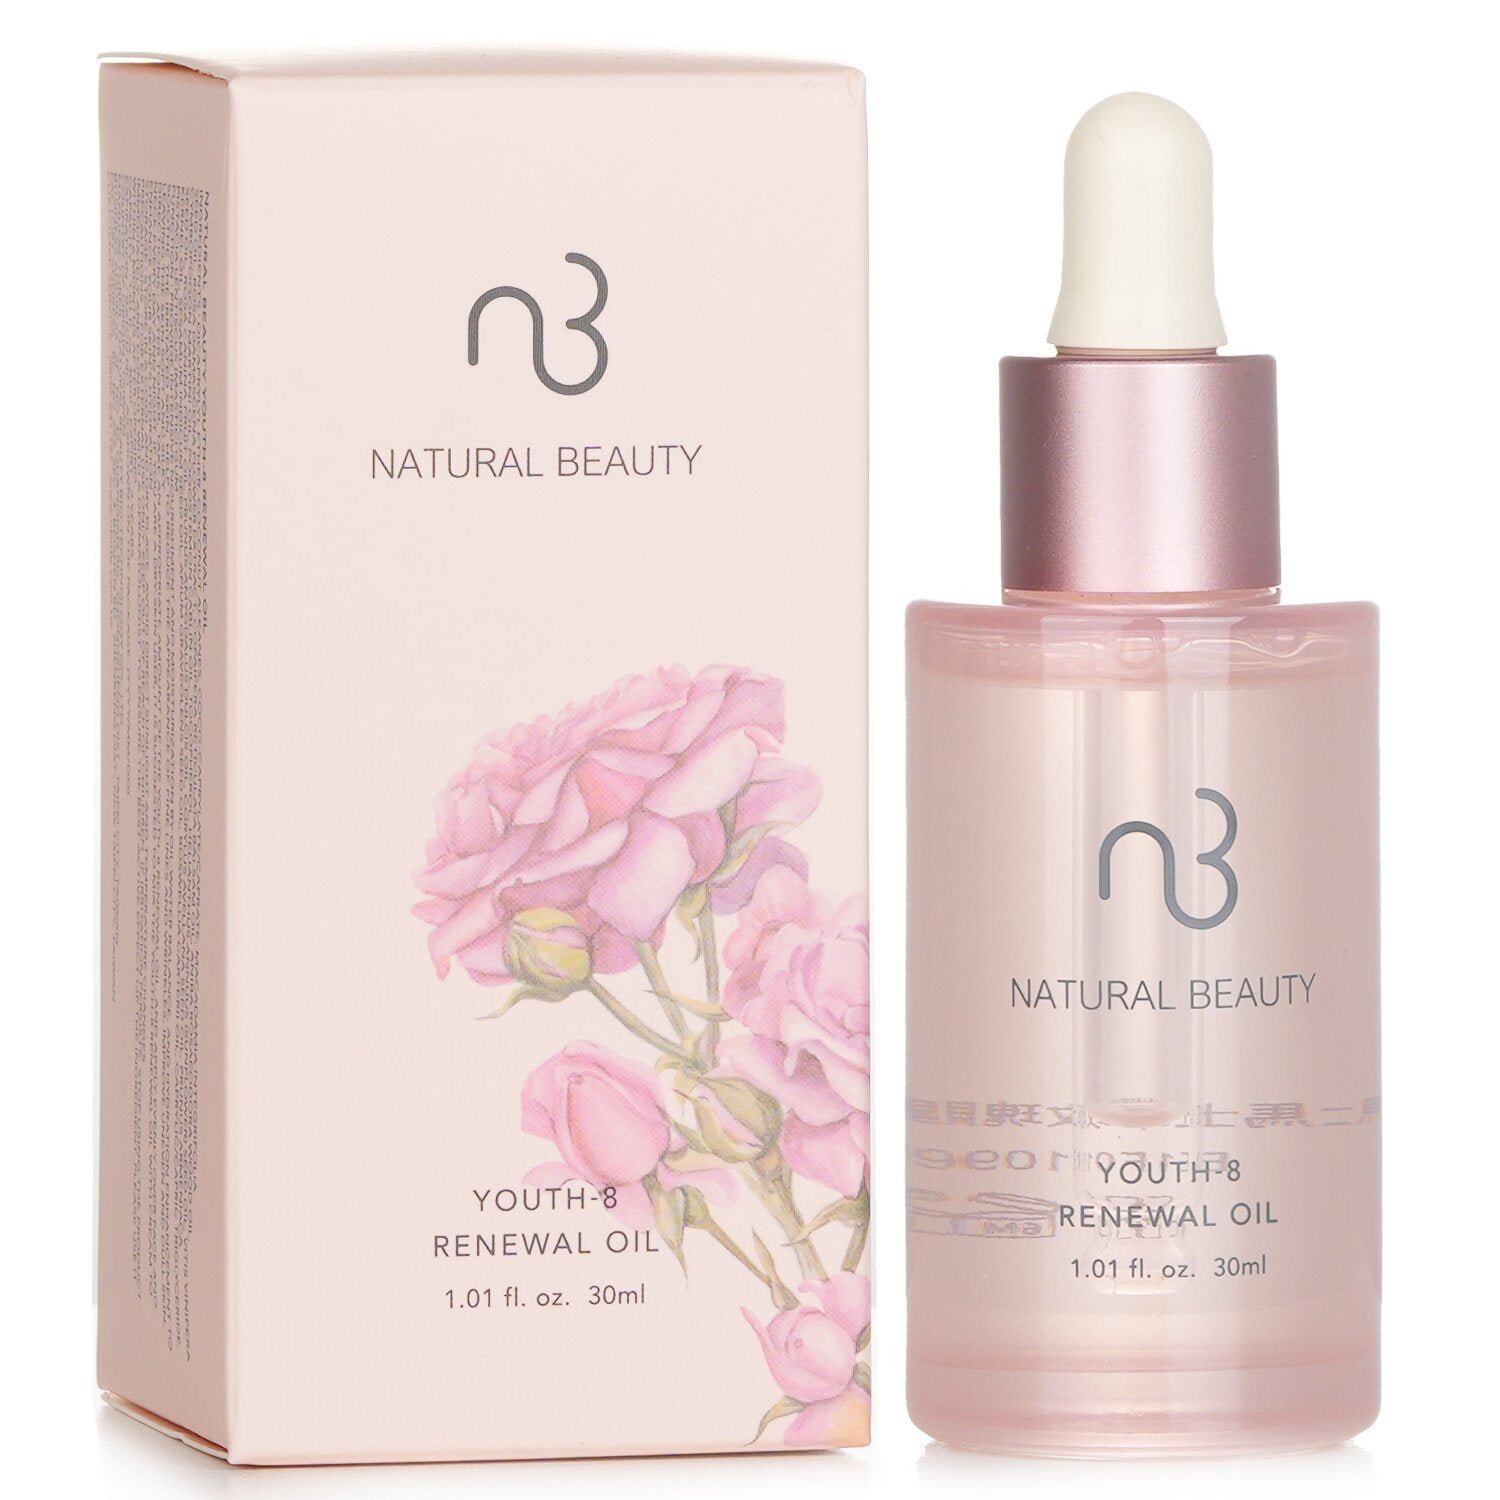 NATURAL BEAUTY - Youth-8 Renewal Oil (New Packaging) E1F0109B / 129680 30ml/1.01oz - lolaluxeshop